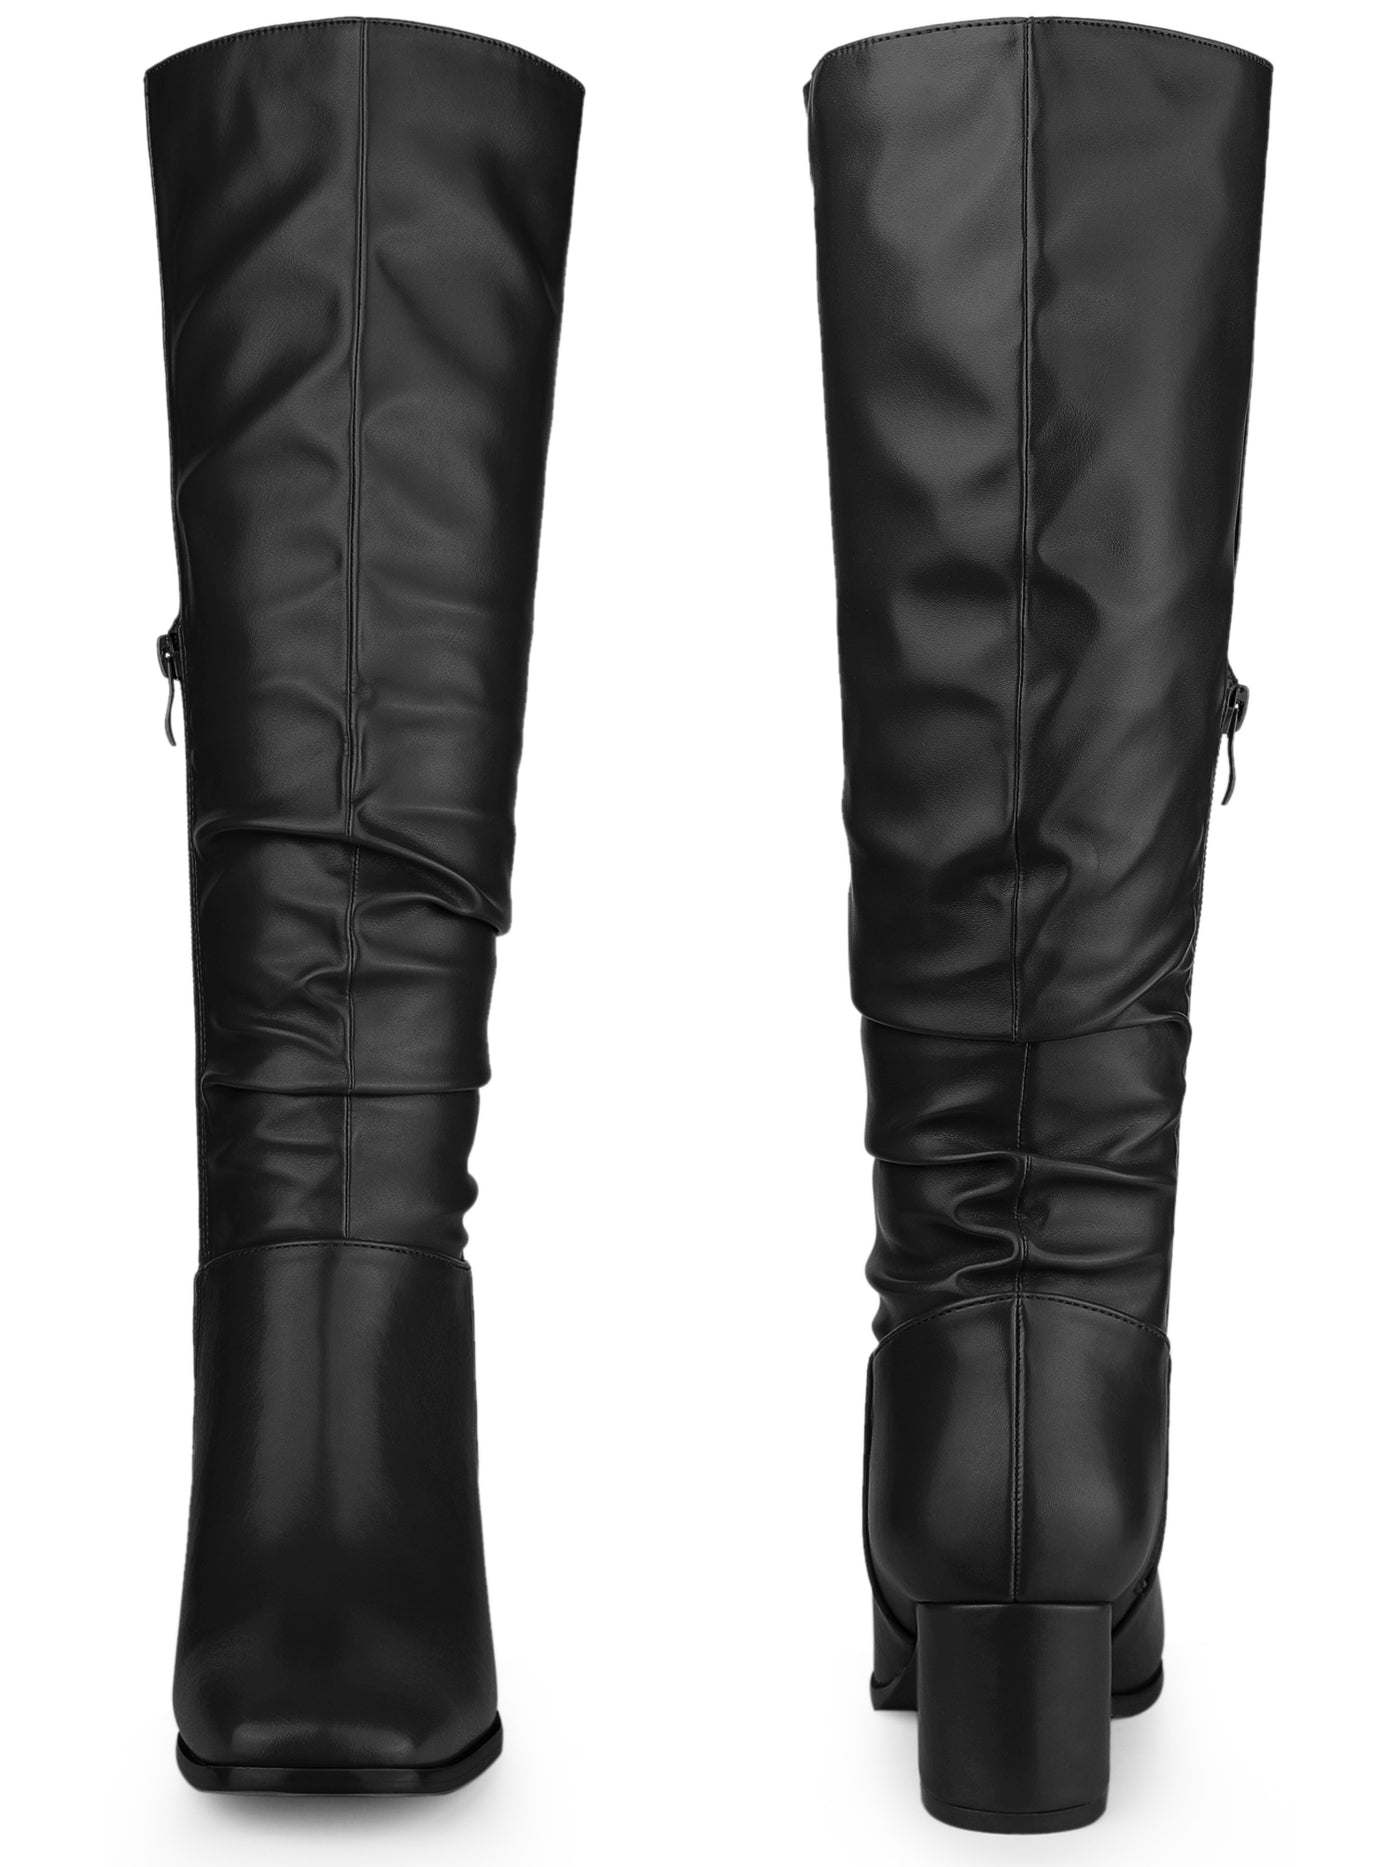 Bublédon Perphy Slouchy Square Toe Chunky Heel Knee High Boots for Women